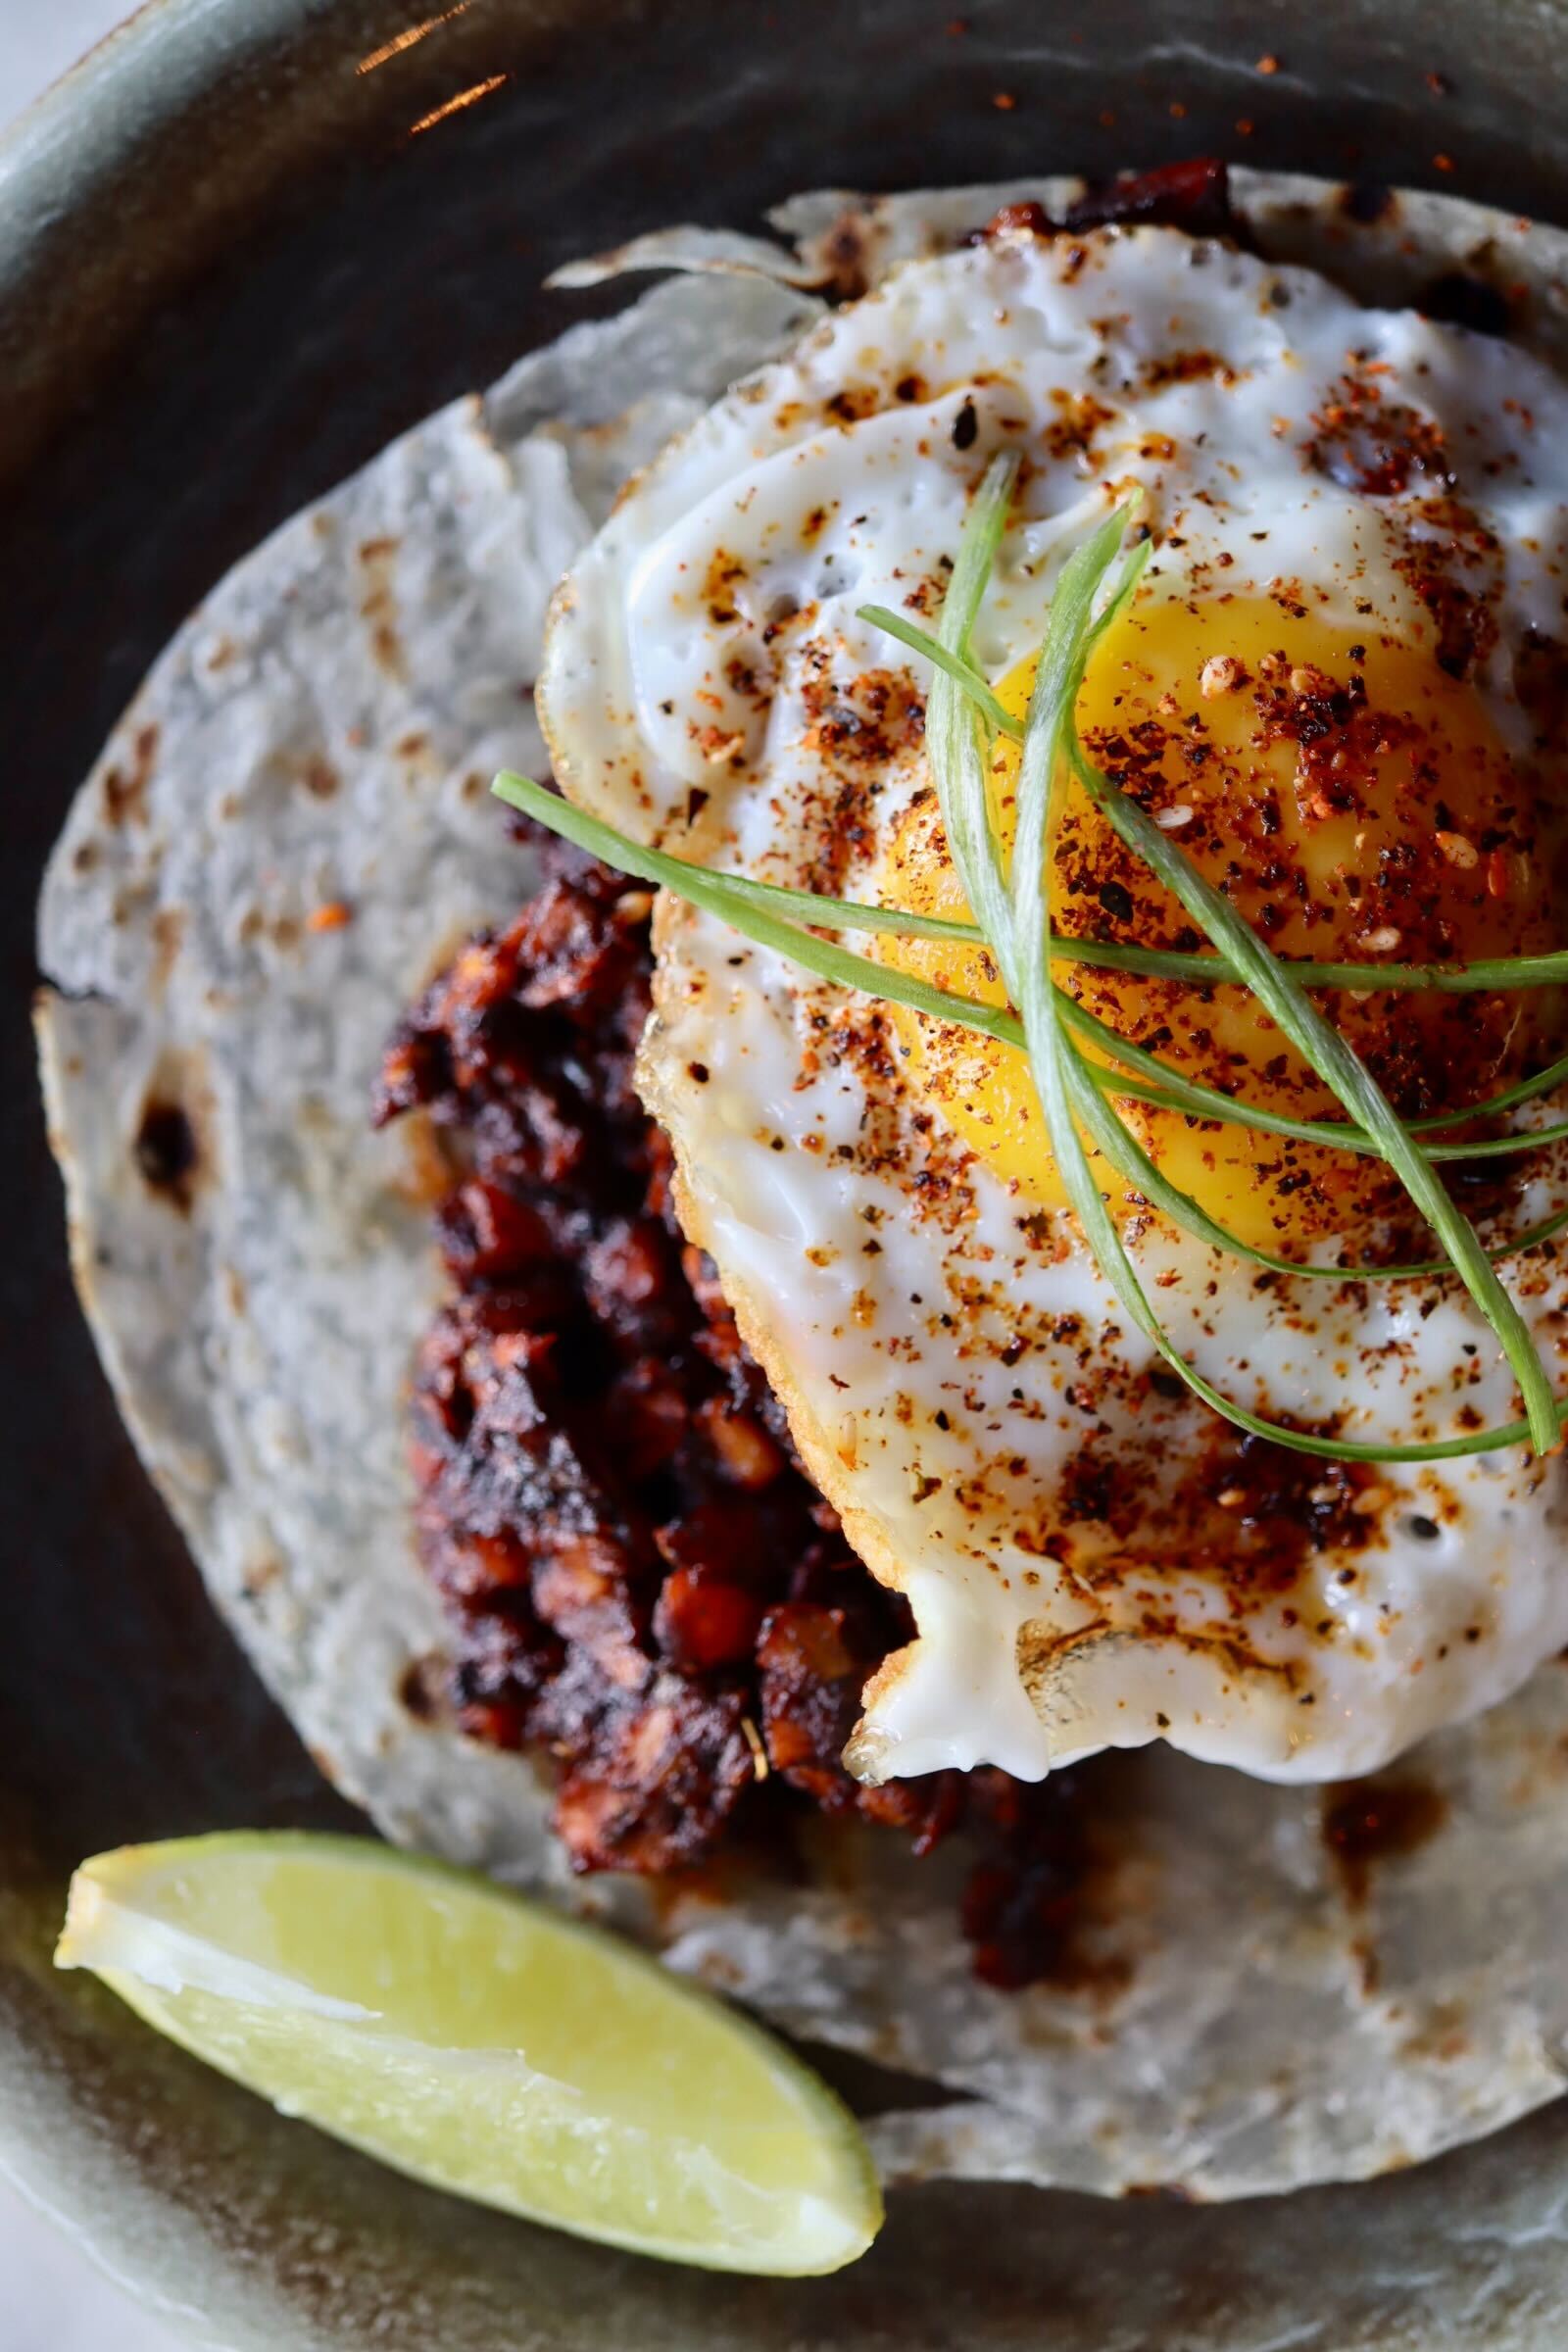 Chinese chorizo and a fried egg (Photo by Hannah Hernandez)